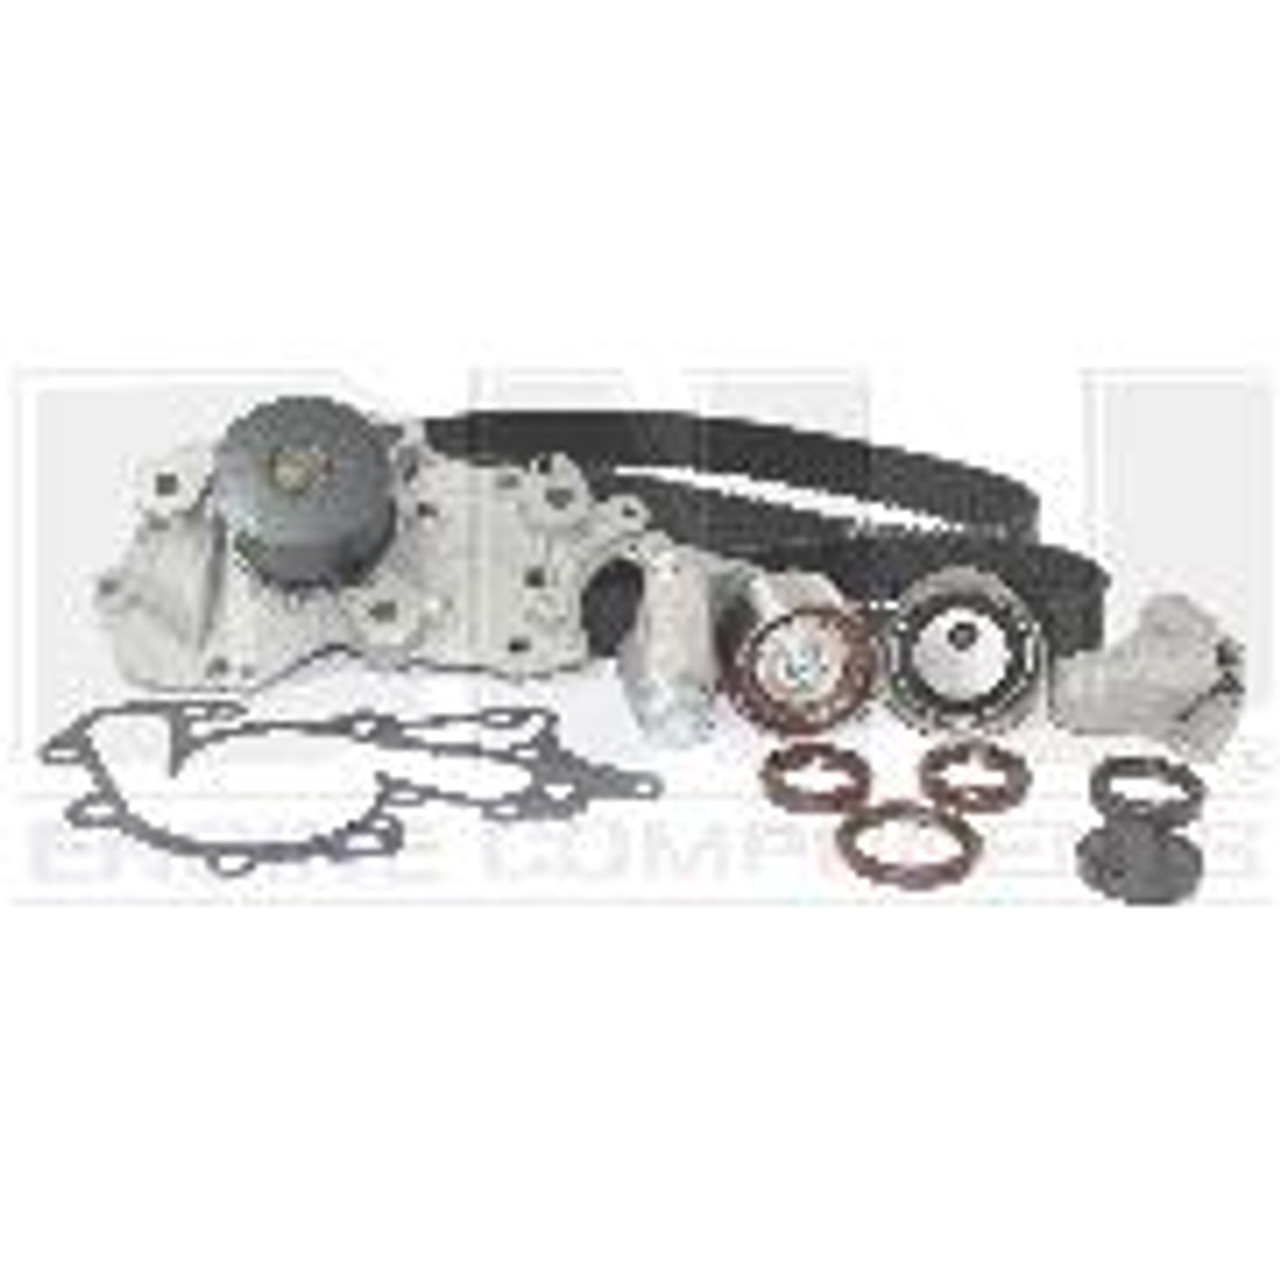 2007 Kia Rondo 2.7L Engine Timing Belt Kit with Water Pump TBK182WP -9